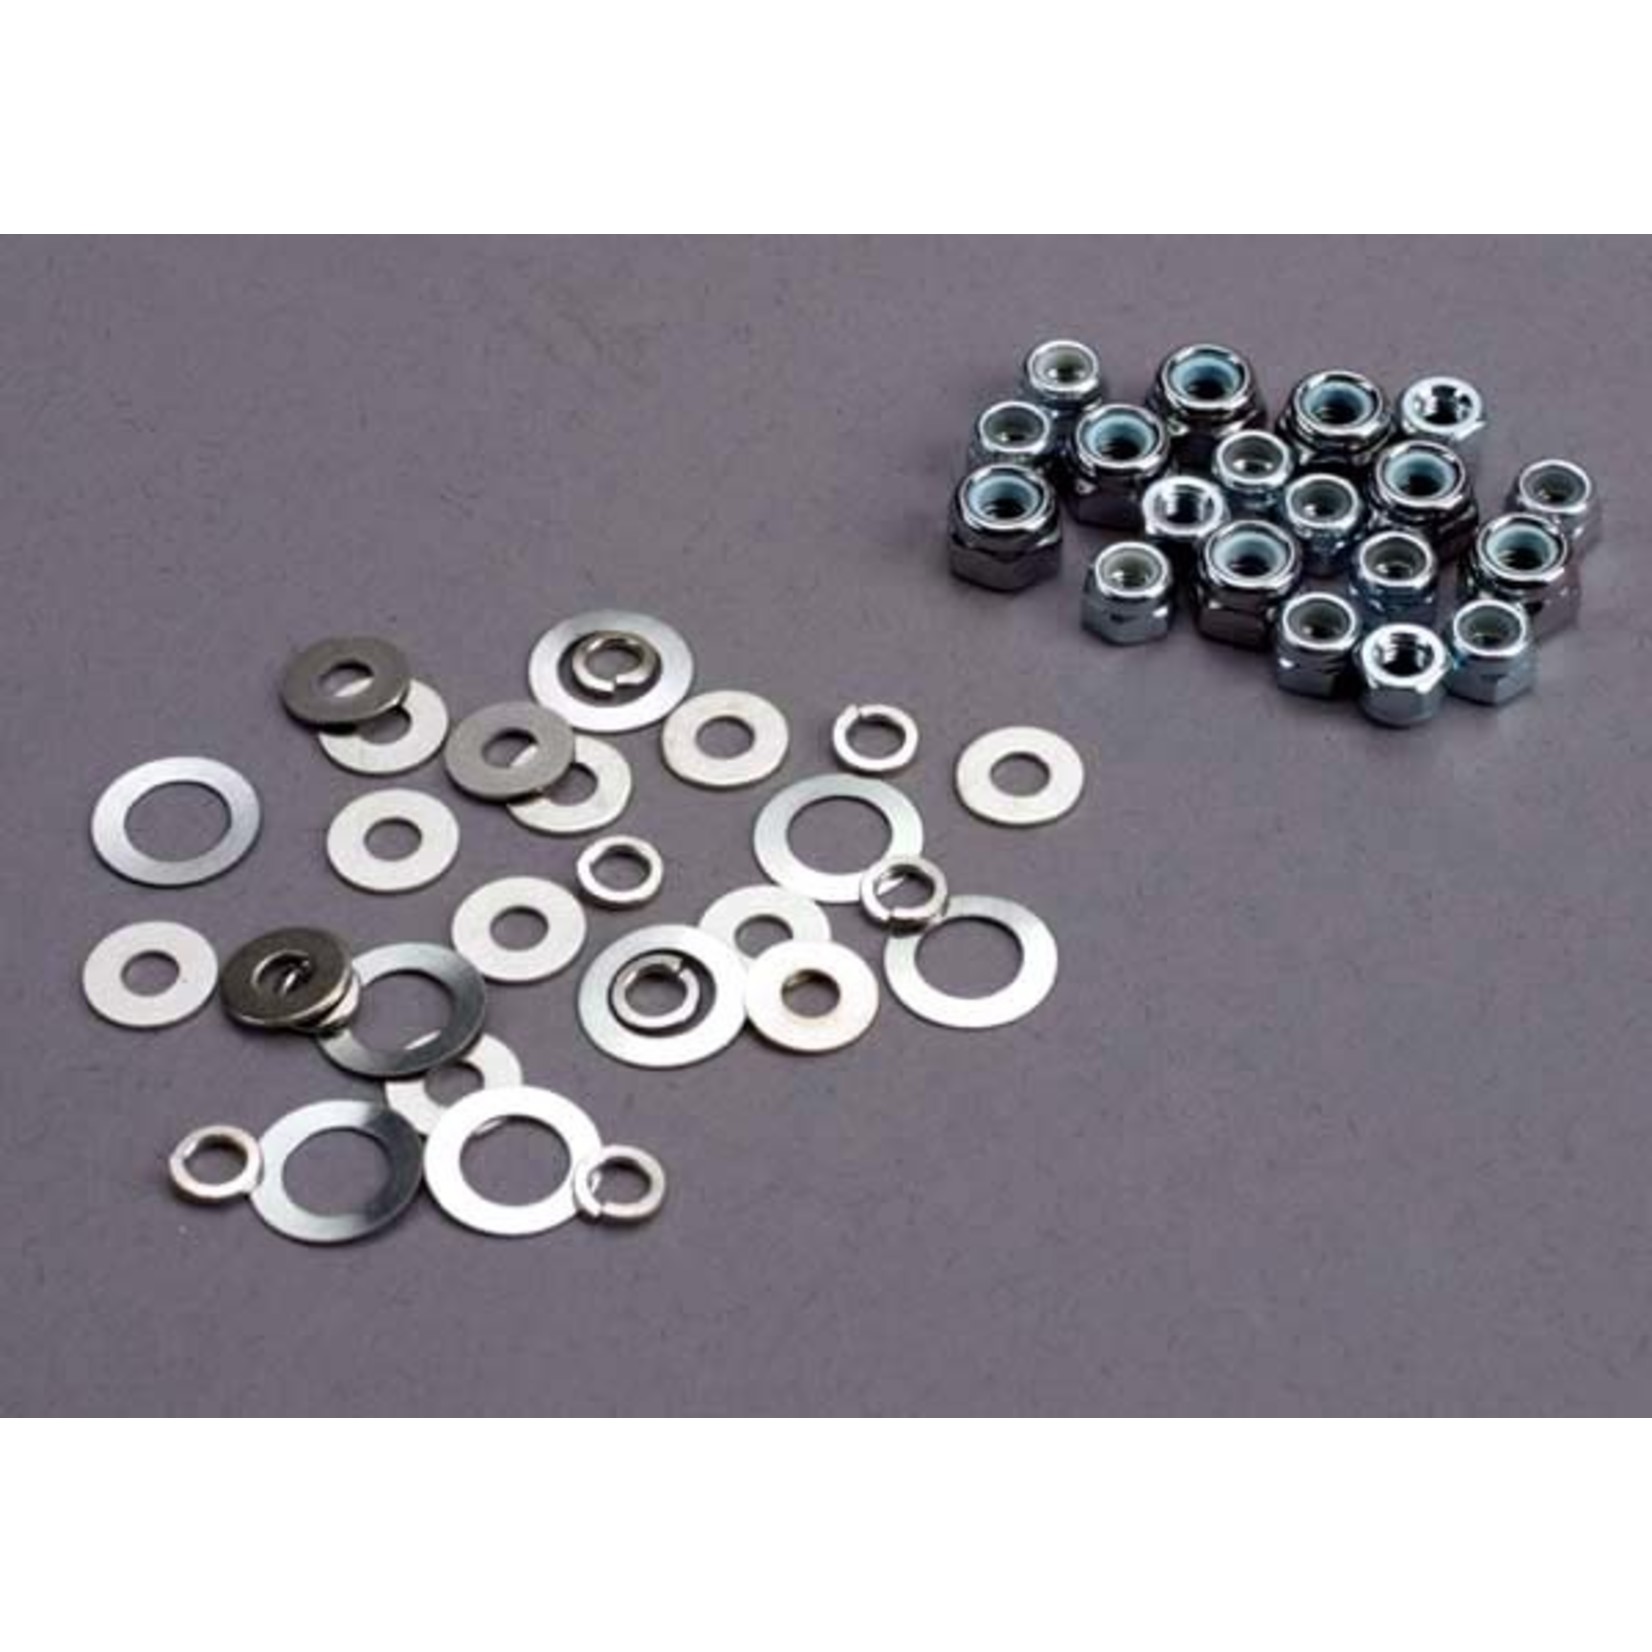 Traxxas 1252 - Nut set, lock nuts (3mm (11) and 4mm(7)) &